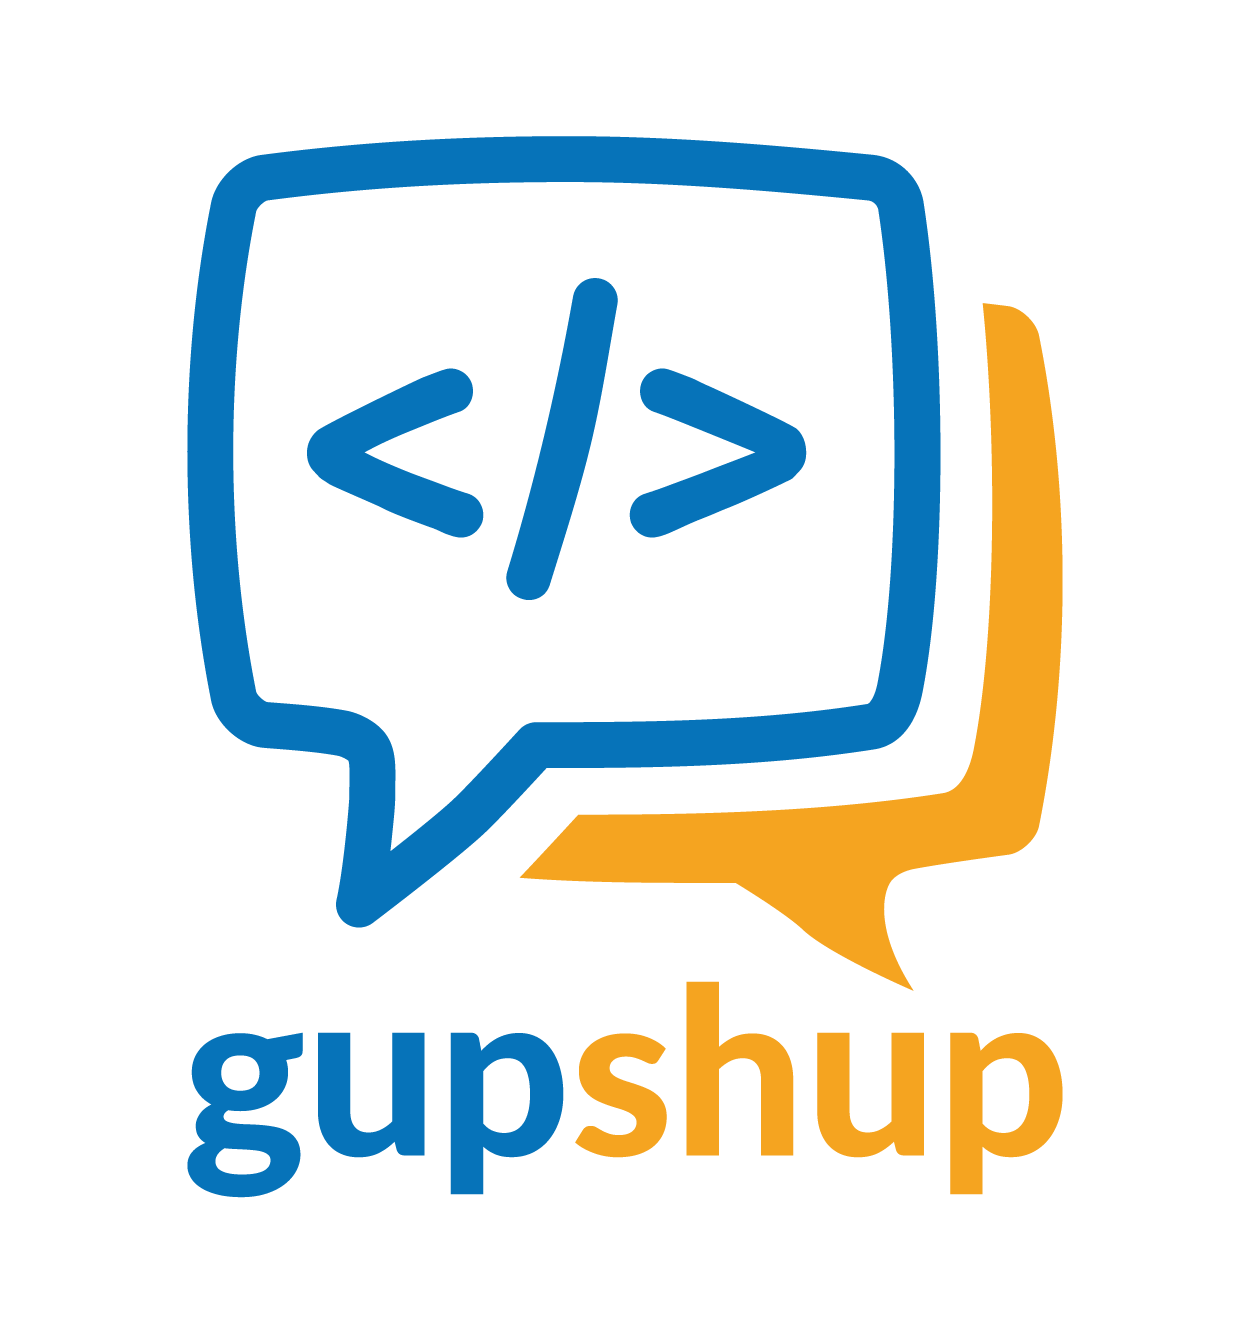 Persio and Gupshup integration